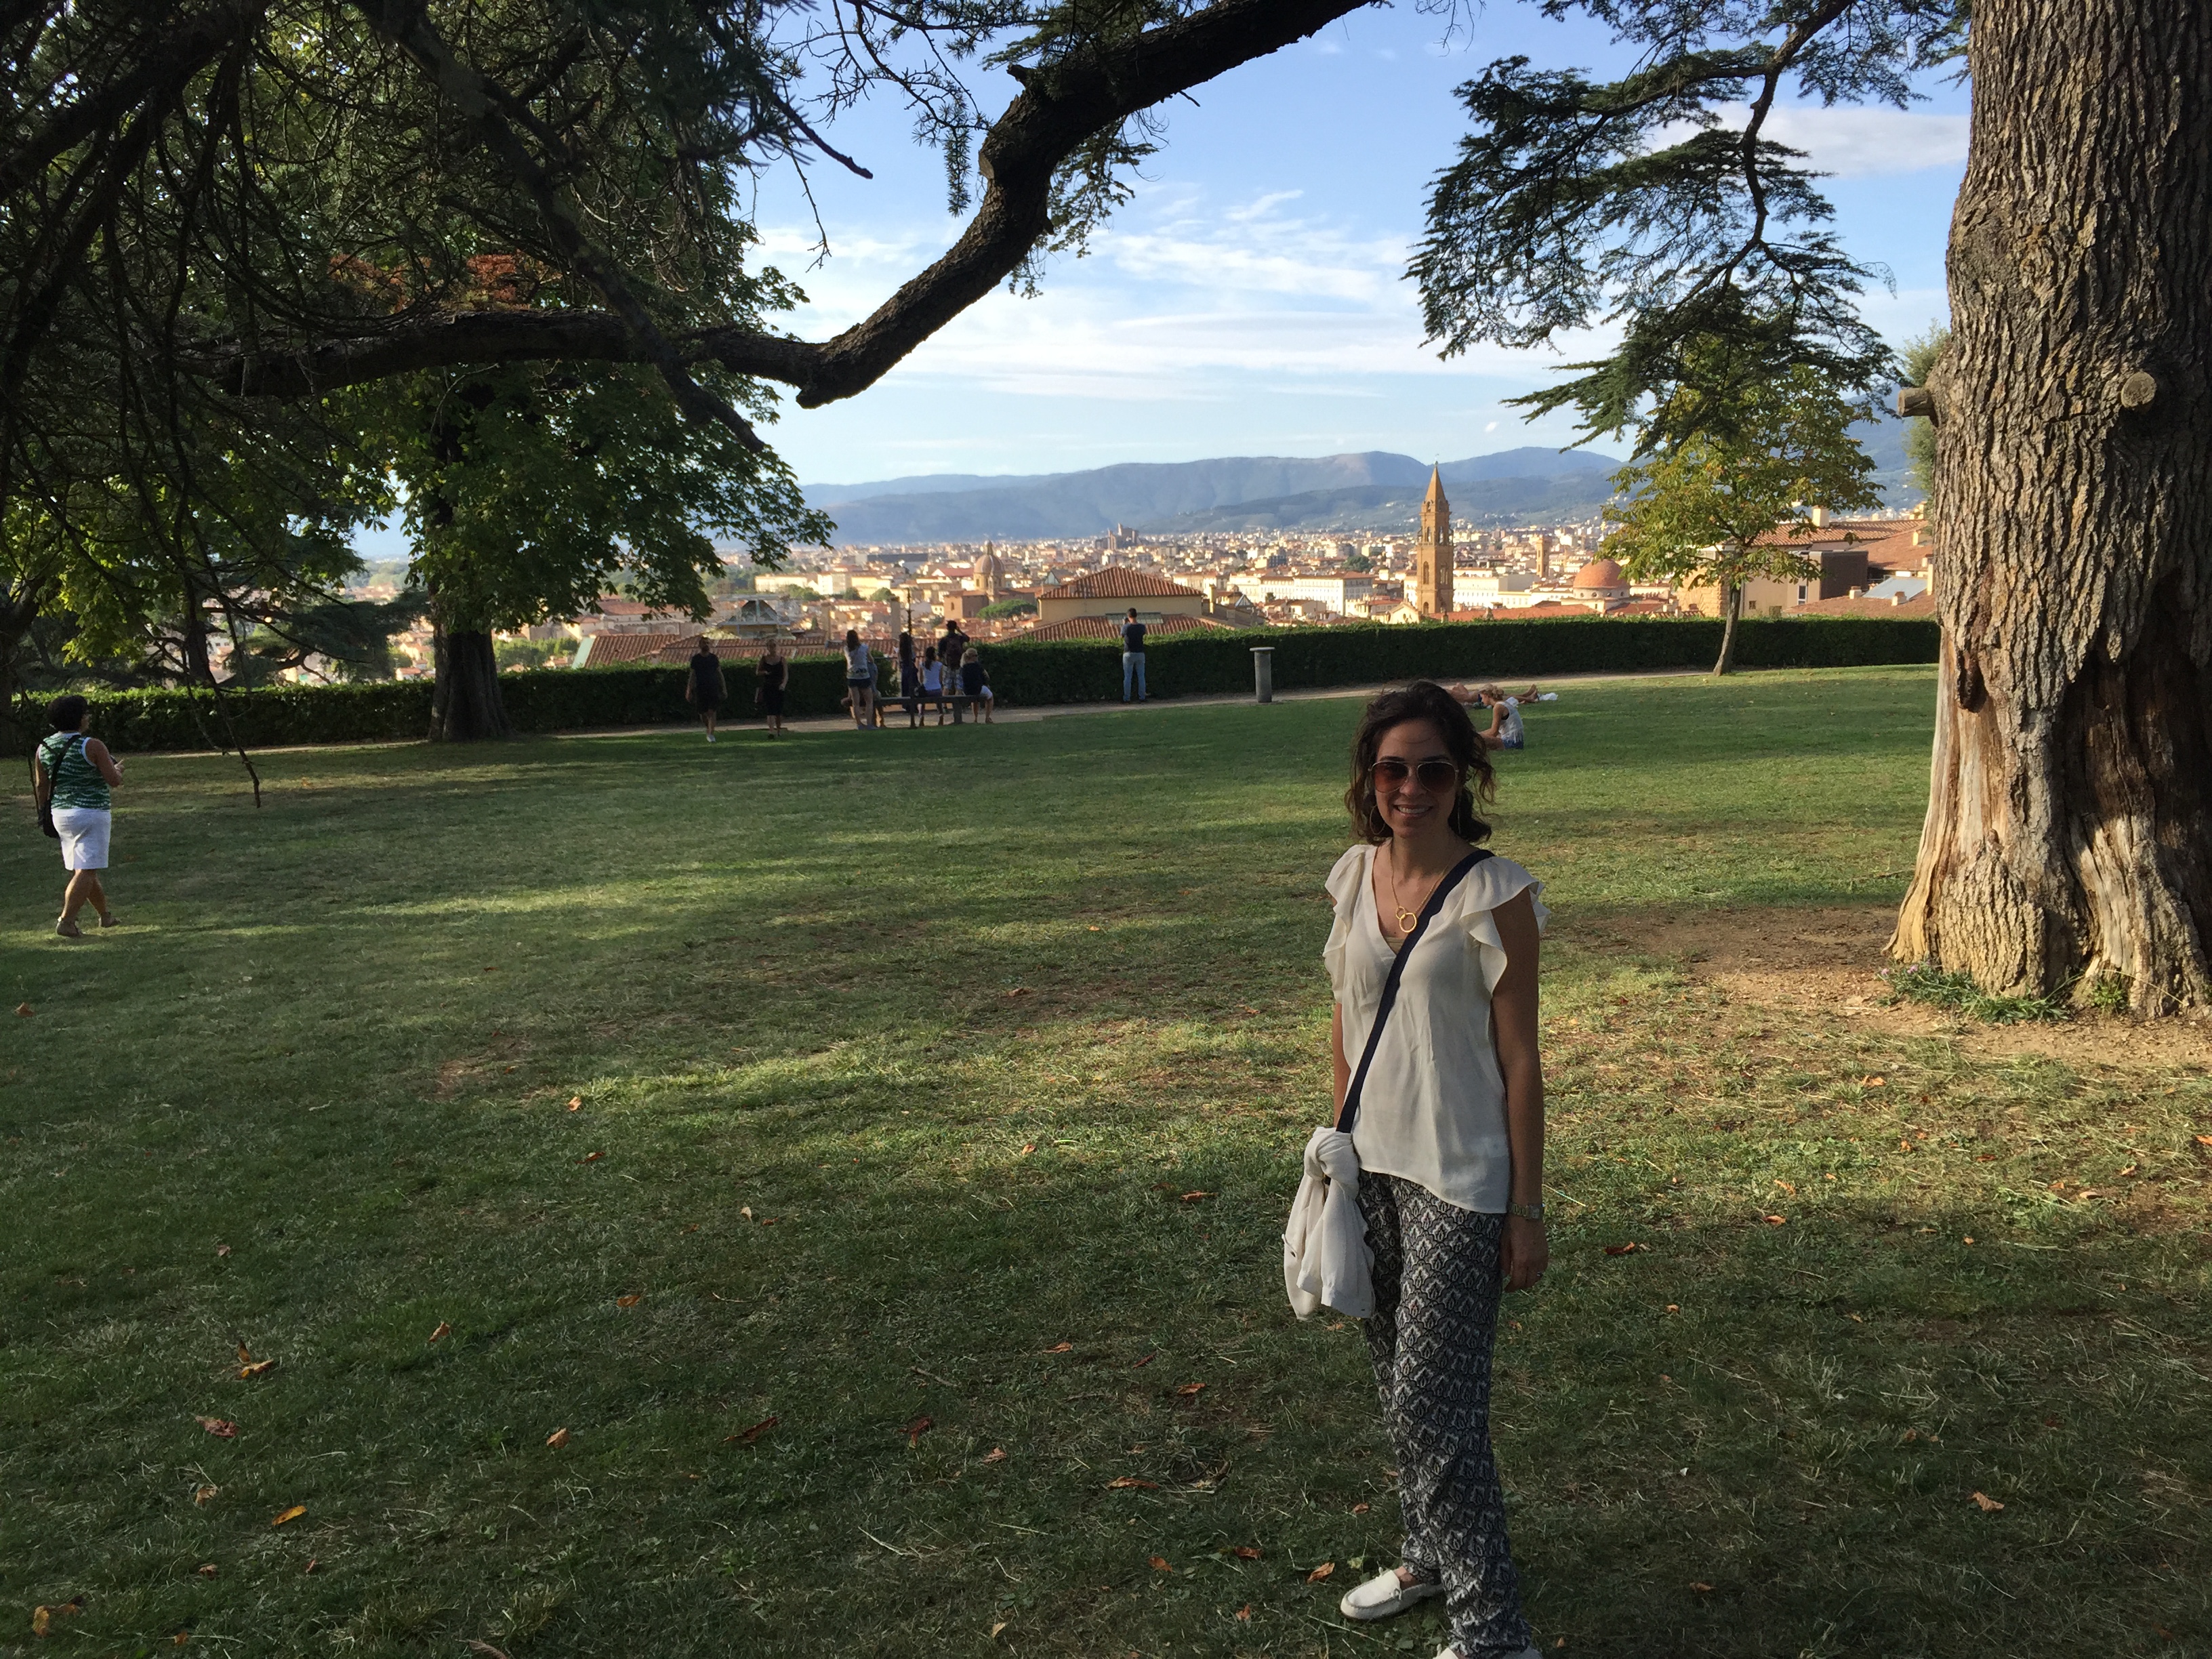 A very popular park for Florentines